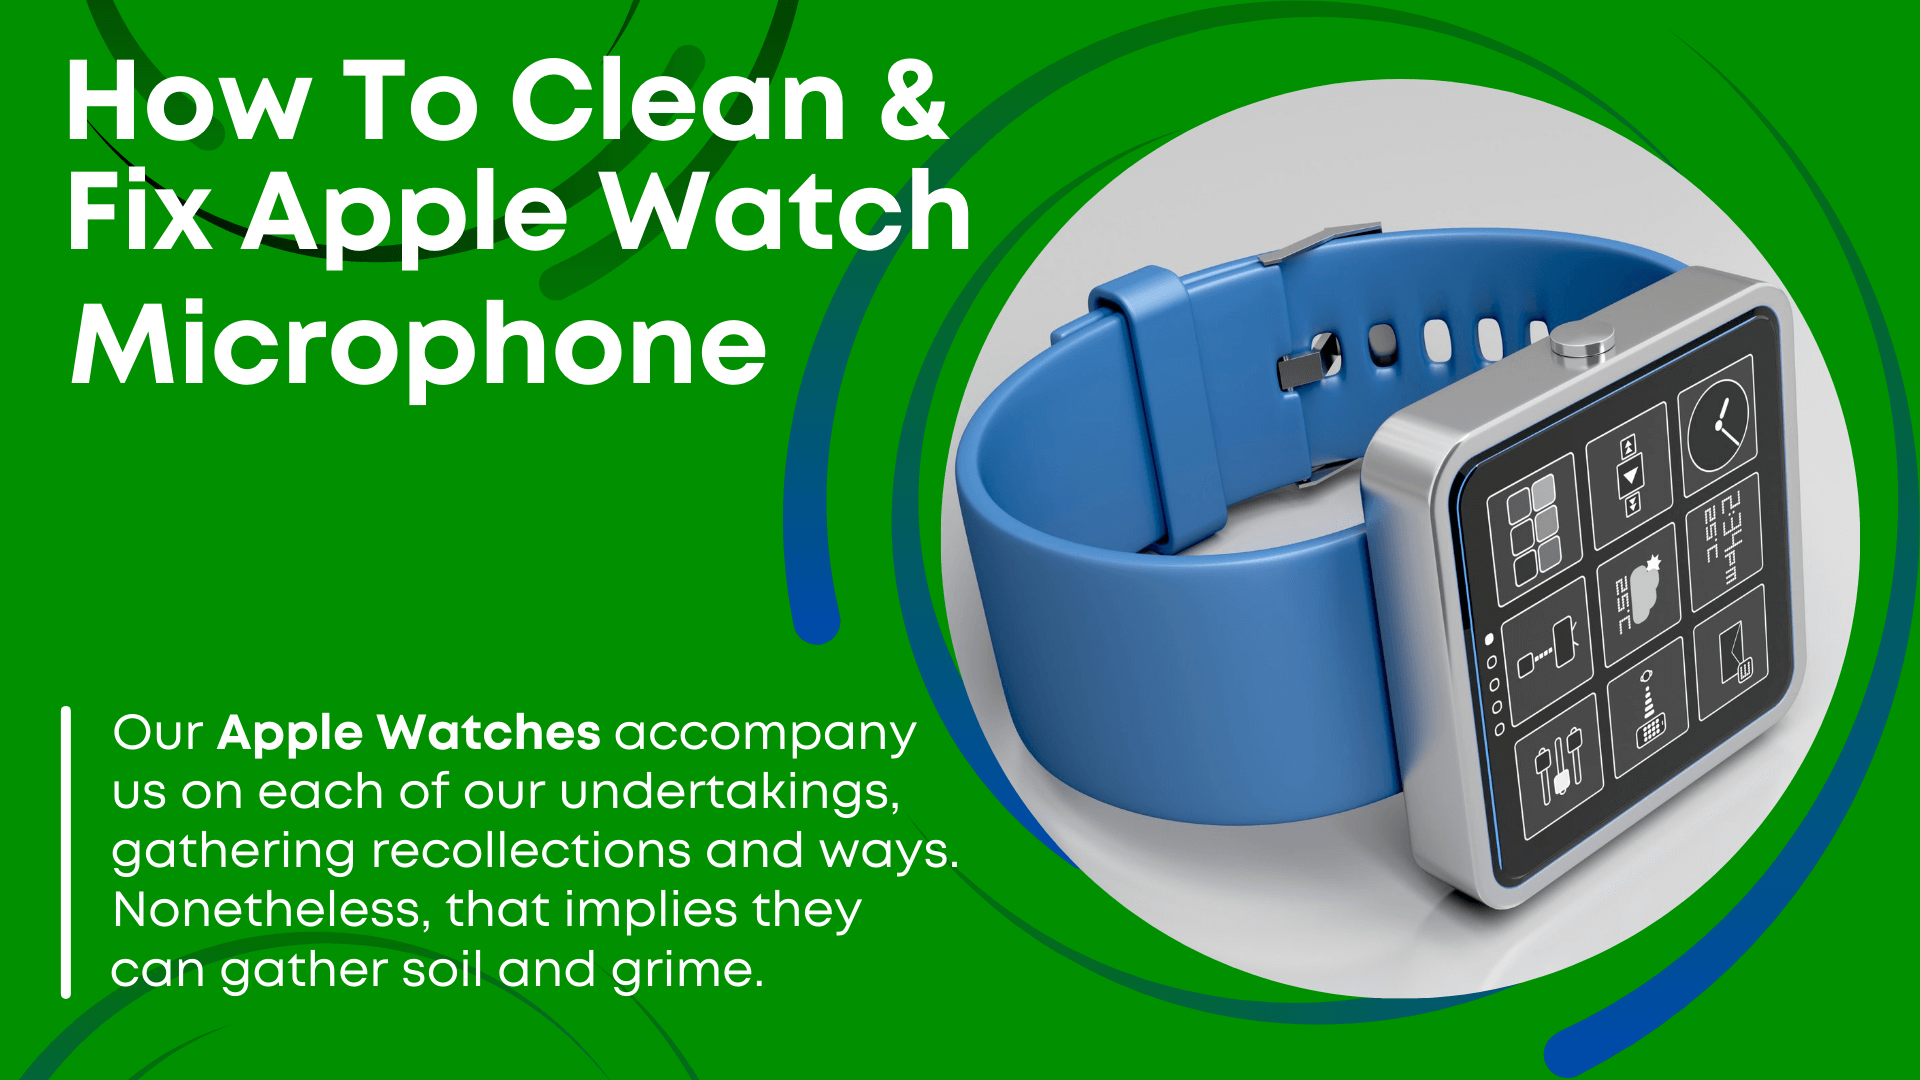 How to clean and fix apple watch Microphone